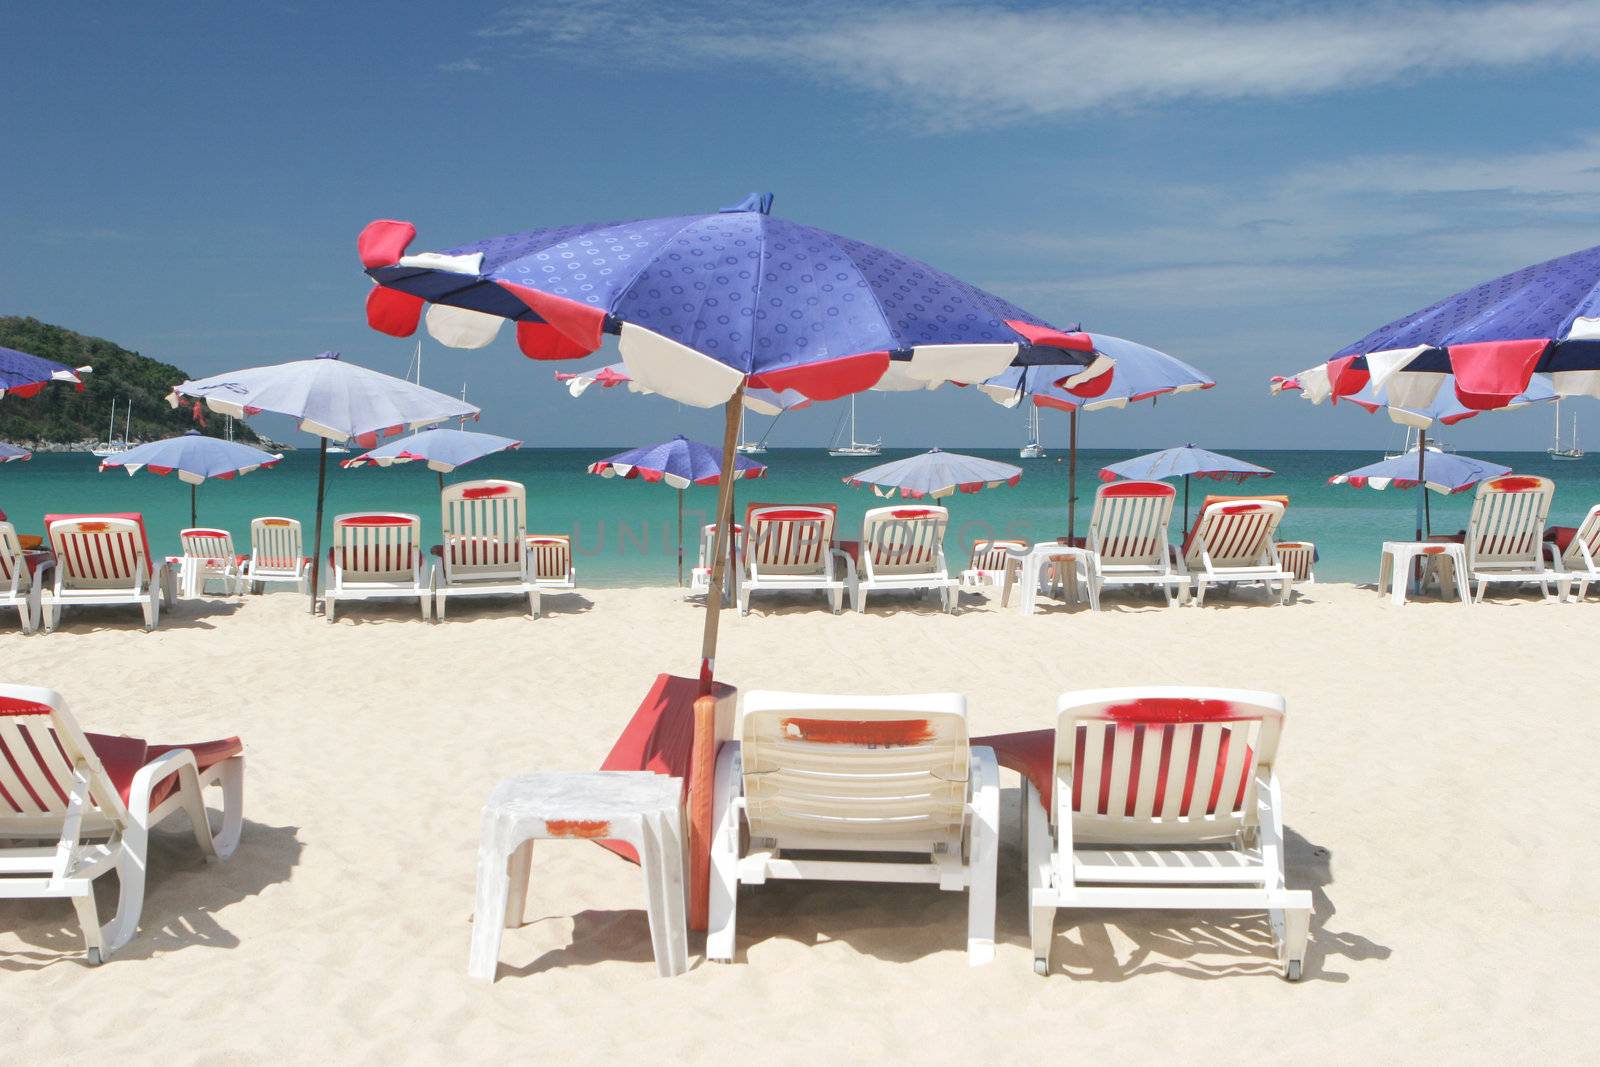 Rows of colorful beach chairs and umbrellas at the beach.